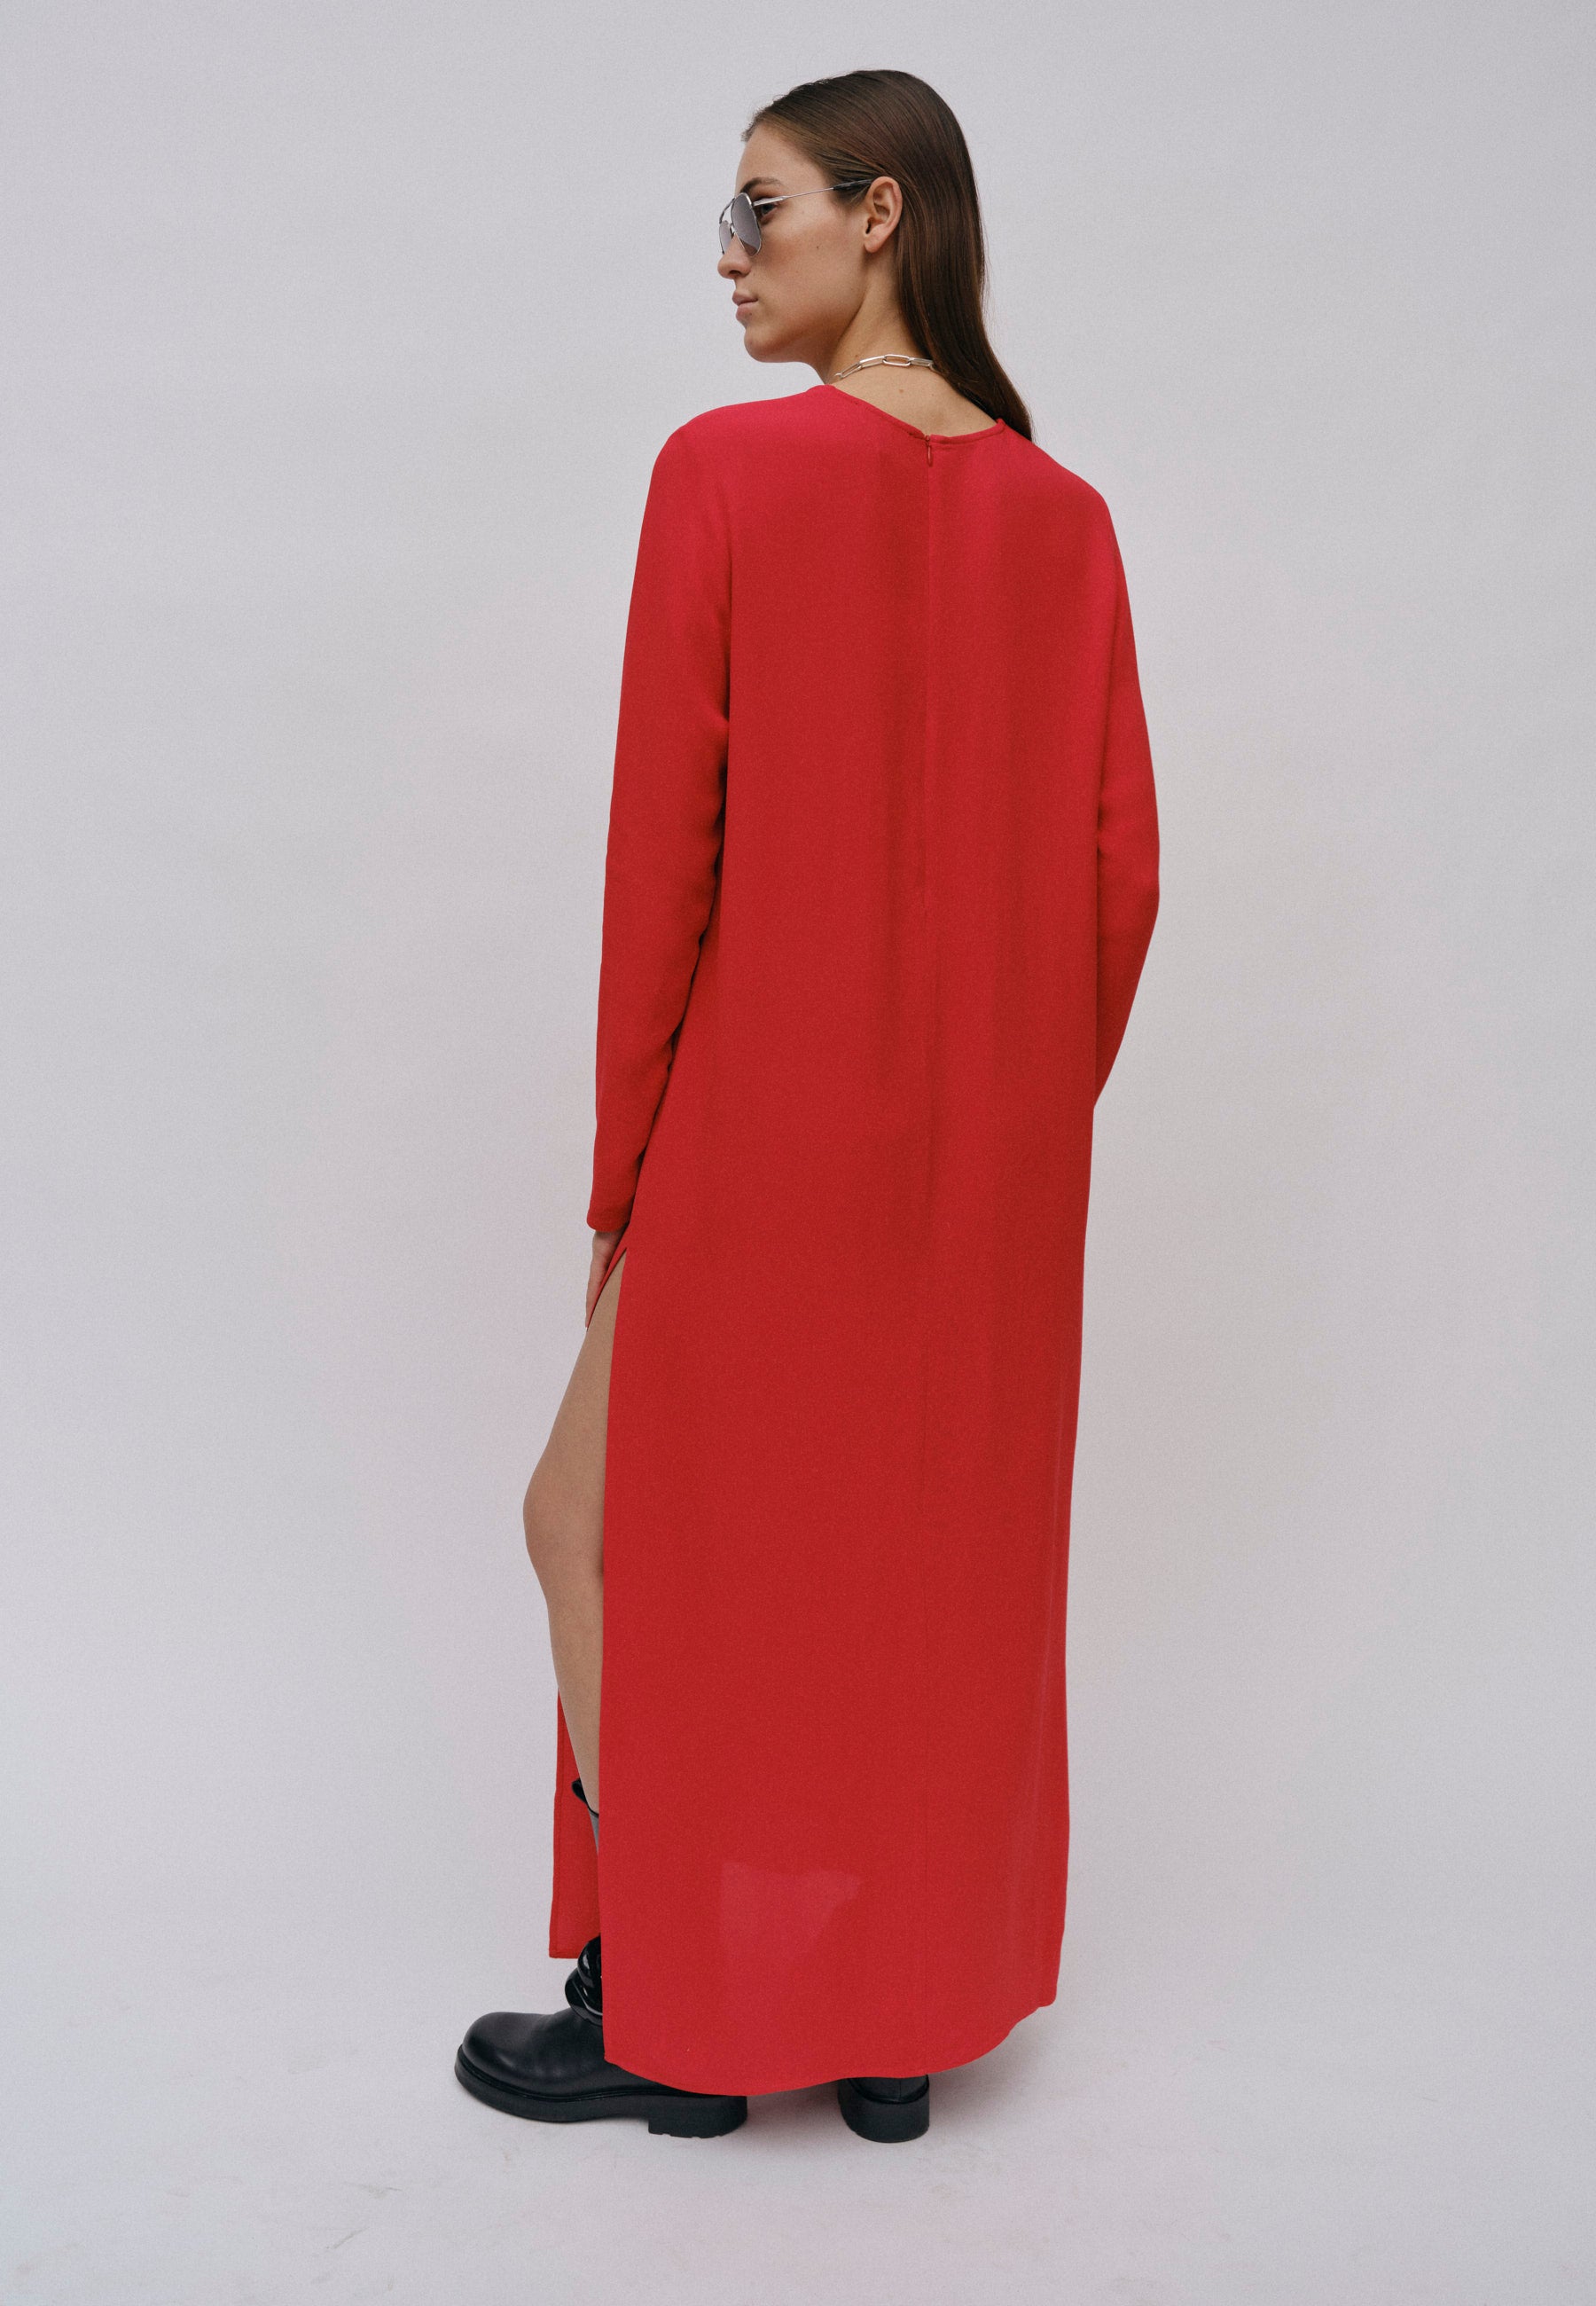 Molly Dress - Red